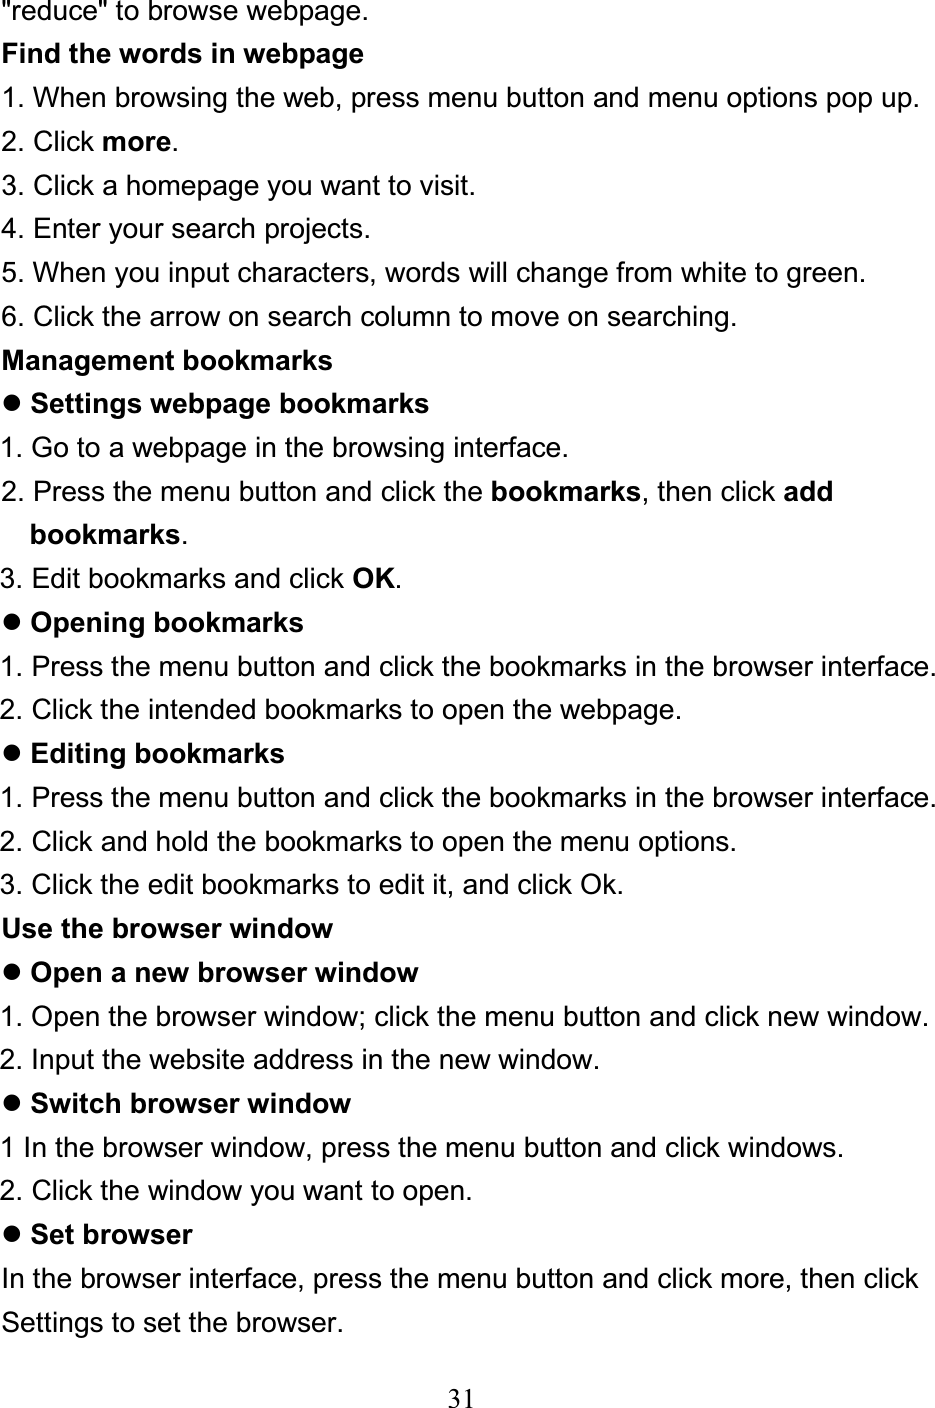 31&quot;reduce&quot; to browse webpage. Find the words in webpage 1. When browsing the web, press menu button and menu options pop up. 2. Click more.3. Click a homepage you want to visit. 4. Enter your search projects. 5. When you input characters, words will change from white to green. 6. Click the arrow on search column to move on searching. Management bookmarks zSettings webpage bookmarks 1. Go to a webpage in the browsing interface. 2. Press the menu button and click the bookmarks, then click add  bookmarks.3. Edit bookmarks and click OK.zOpening bookmarks1. Press the menu button and click the bookmarks in the browser interface. 2. Click the intended bookmarks to open the webpage. zEditing bookmarks 1. Press the menu button and click the bookmarks in the browser interface. 2. Click and hold the bookmarks to open the menu options. 3. Click the edit bookmarks to edit it, and click Ok. Use the browser window zOpen a new browser window 1. Open the browser window; click the menu button and click new window. 2. Input the website address in the new window. zSwitch browser window 1 In the browser window, press the menu button and click windows. 2. Click the window you want to open. zSet browser In the browser interface, press the menu button and click more, then click   Settings to set the browser. 